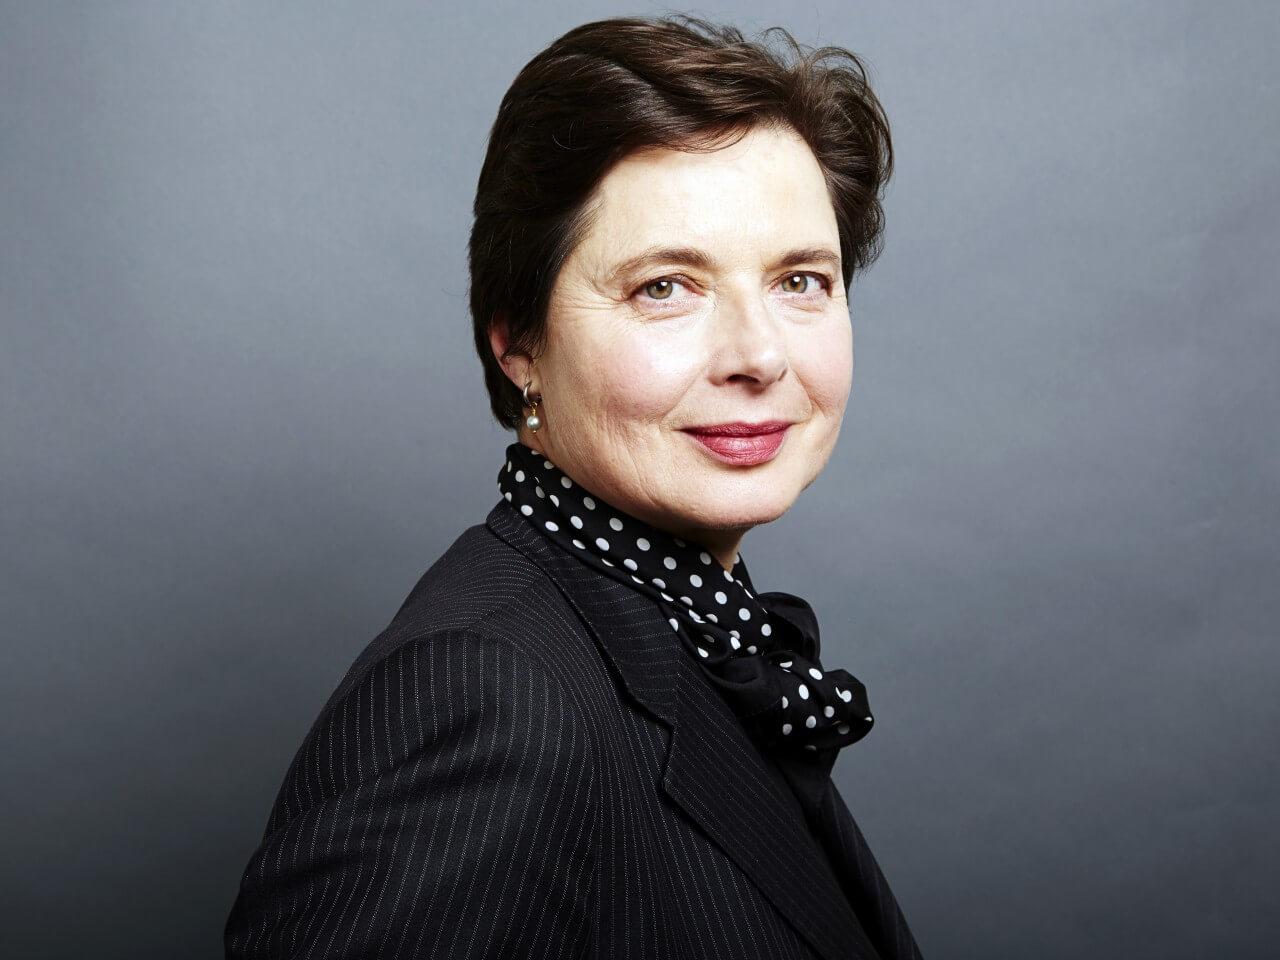 65+ Hot Pictures Of Isabella Rossellini Will Win Your Hearts | Best Of Comic Books